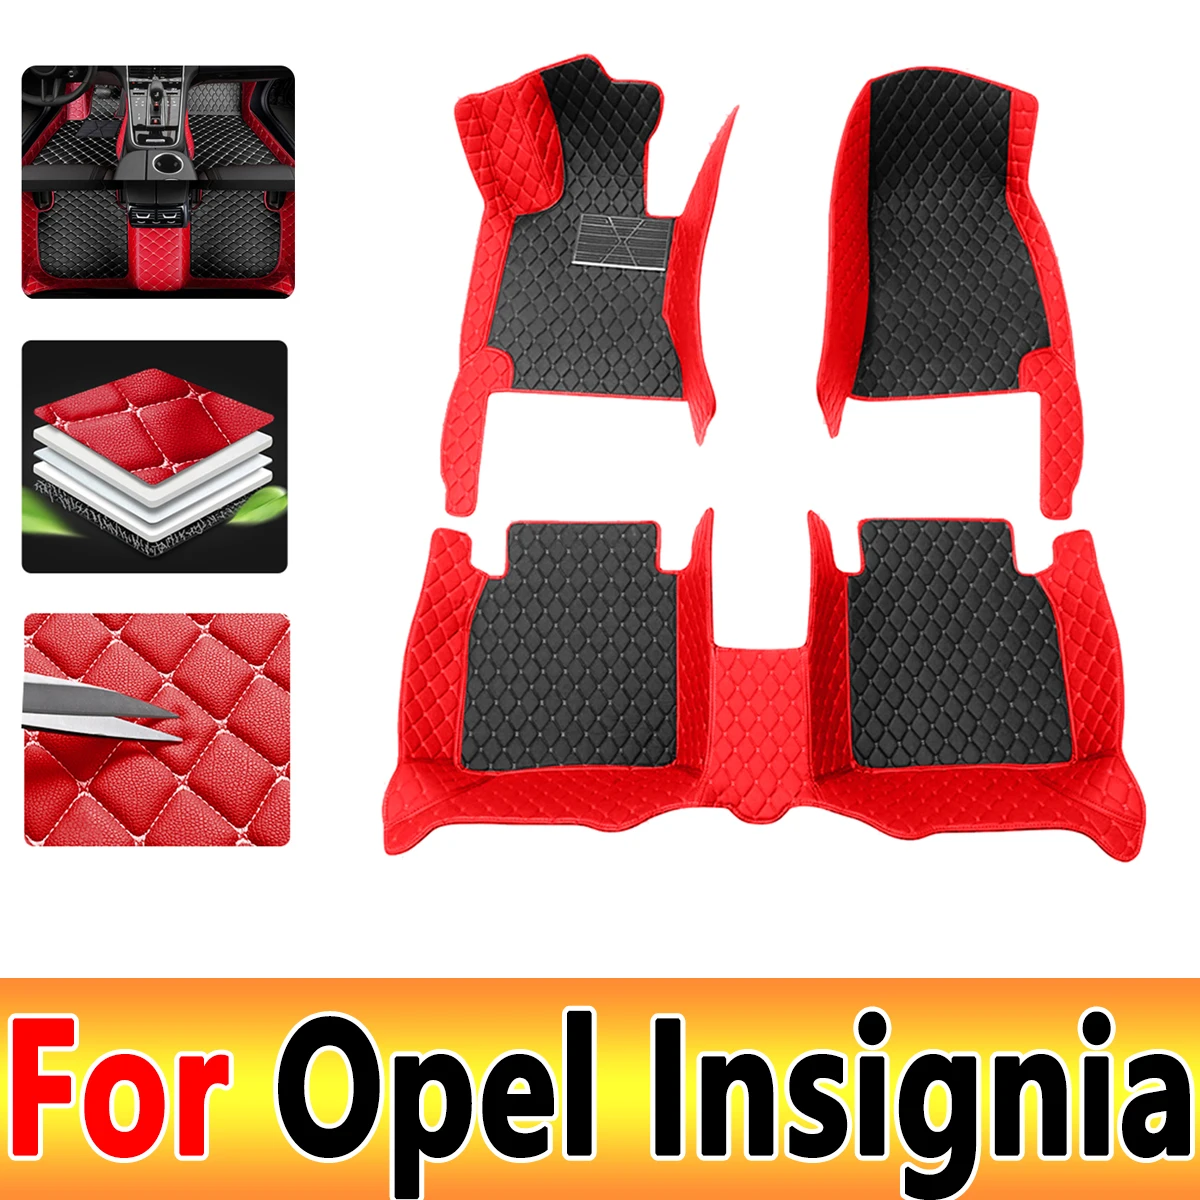 

Car Floor Mats For Opel Insignia Station Wagon 2010 2011 2012 2013 Custom Auto Foot Pads Carpet Cover Interior Accessories